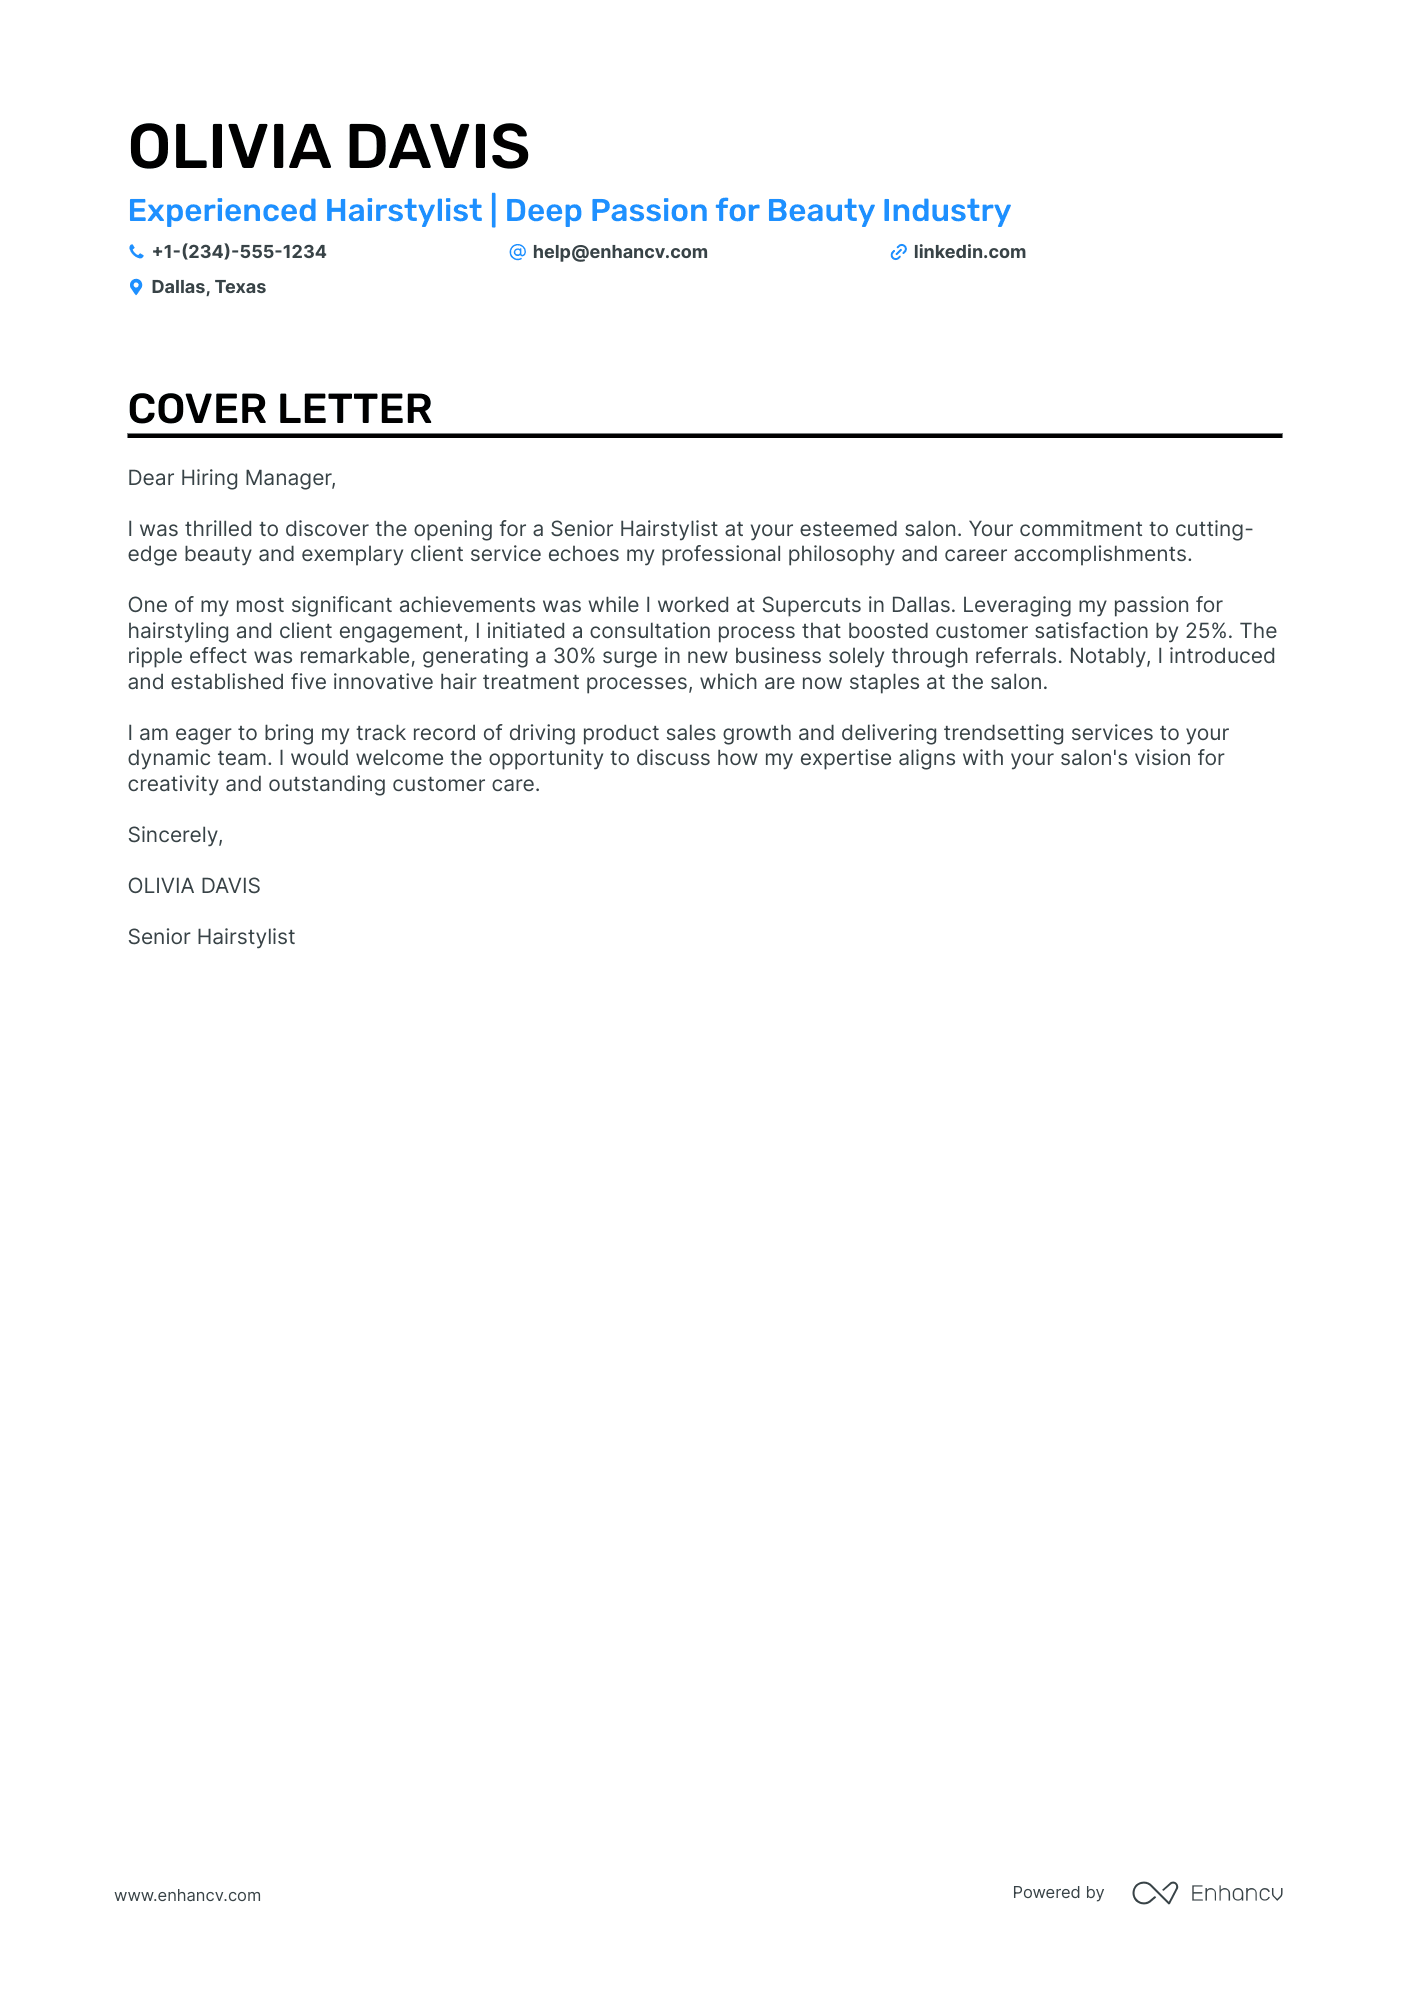 cover letter for hair style